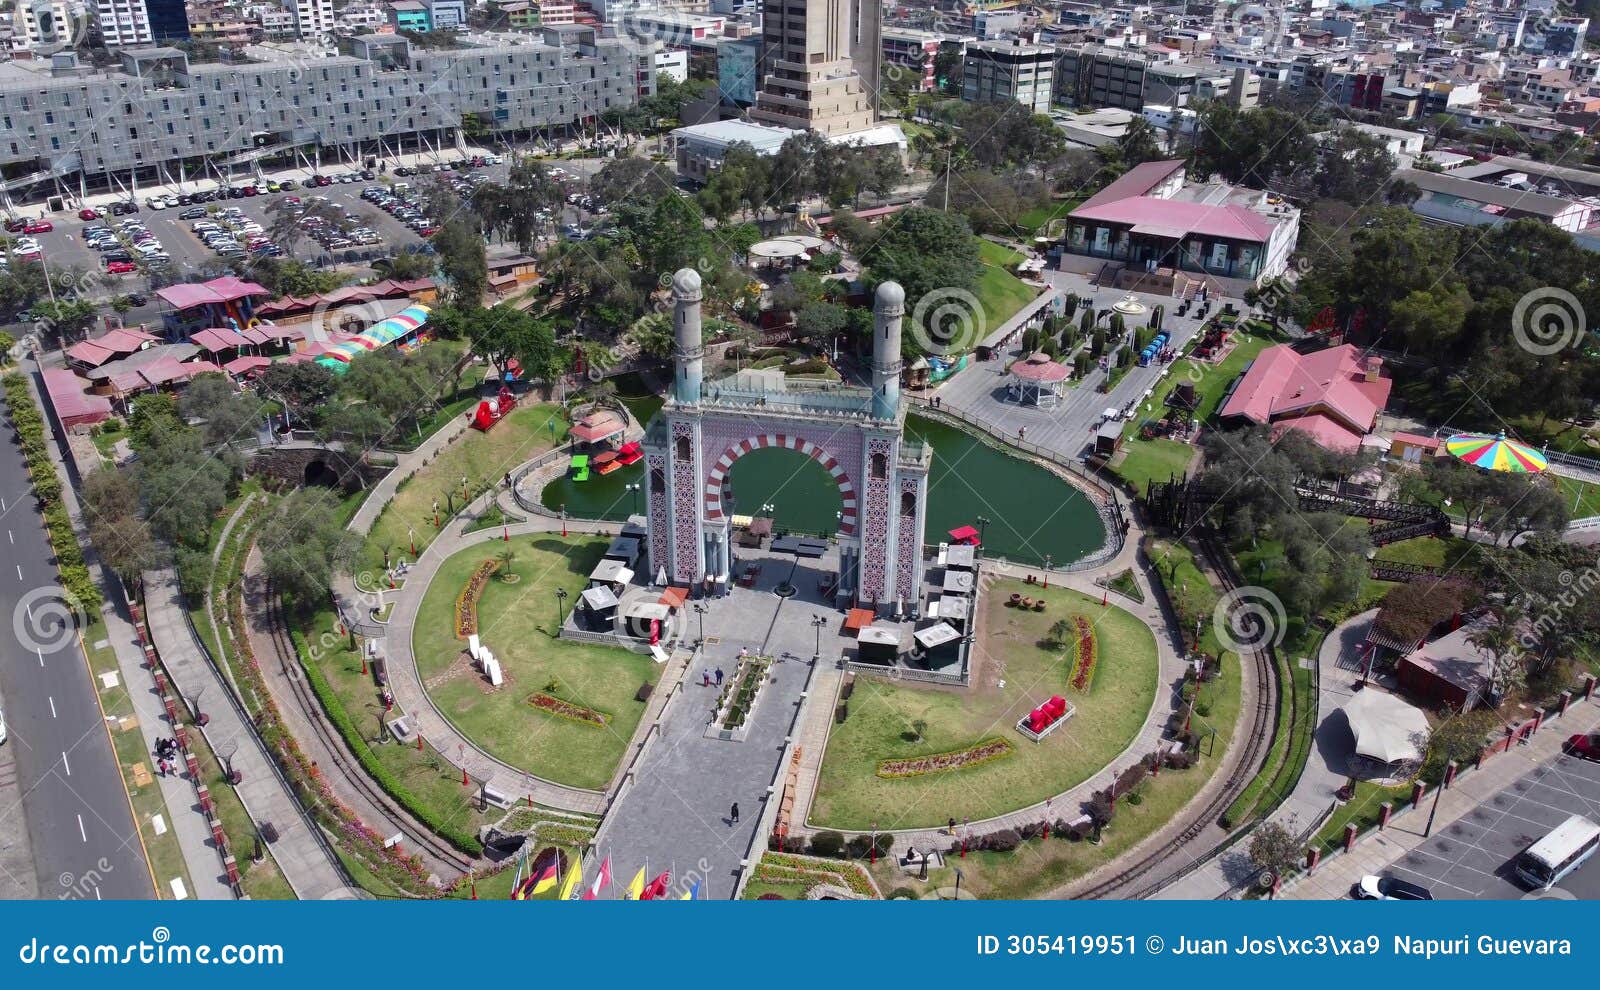 panoramic view of friendship park in the district of santiago de surco in the capital of lima - peru.